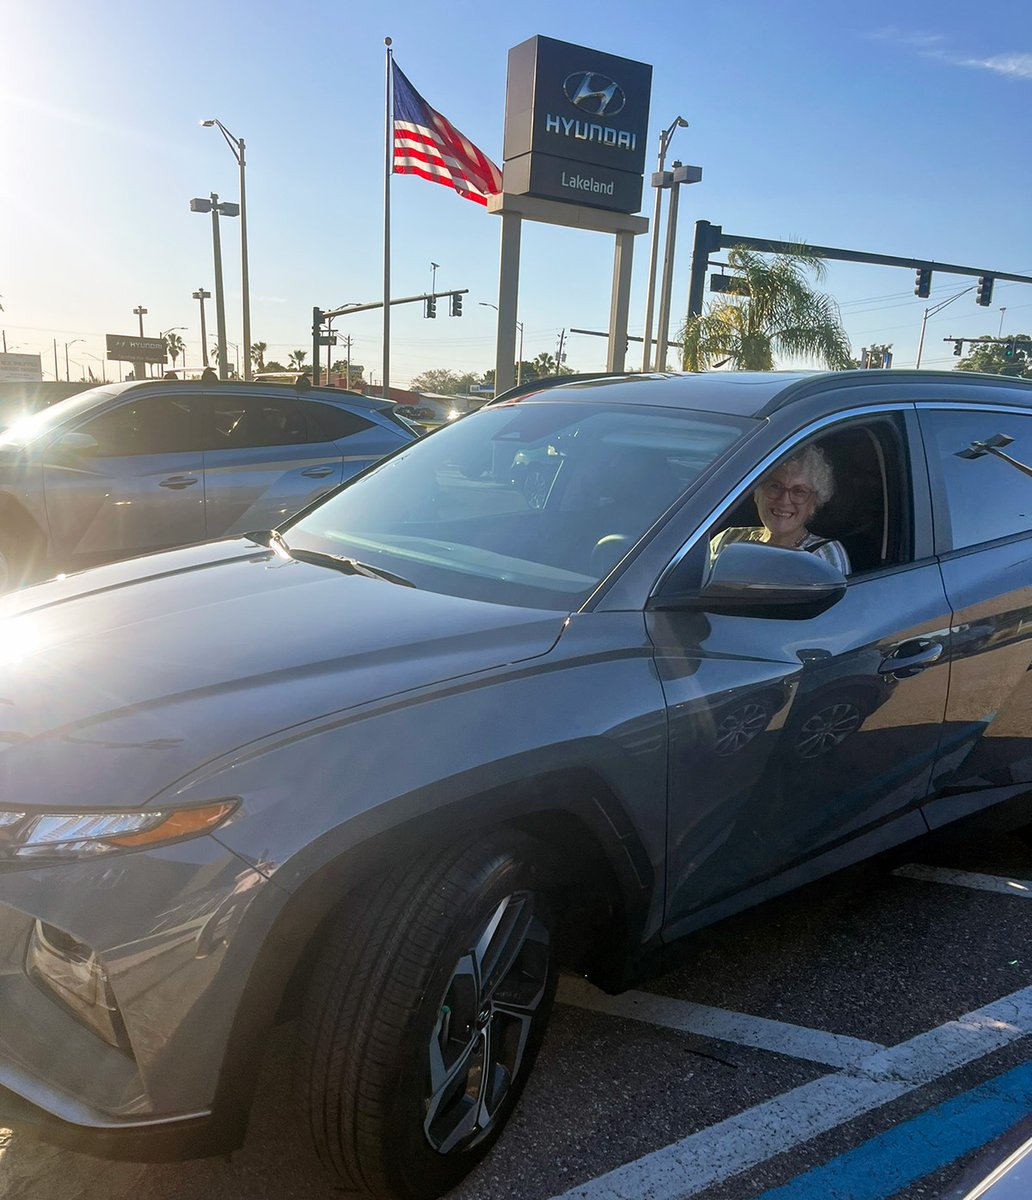 We know the best part of getting a #NewSUV is driving , that's why we make the rest of it #Easy just like salesperson #KageRea did for Yvonne Mitchell when she stopped by for her #2024Tucson. #LookingGood Yvonne & #ThankYou for choosing us - we're here for you! #LakelandHyundai